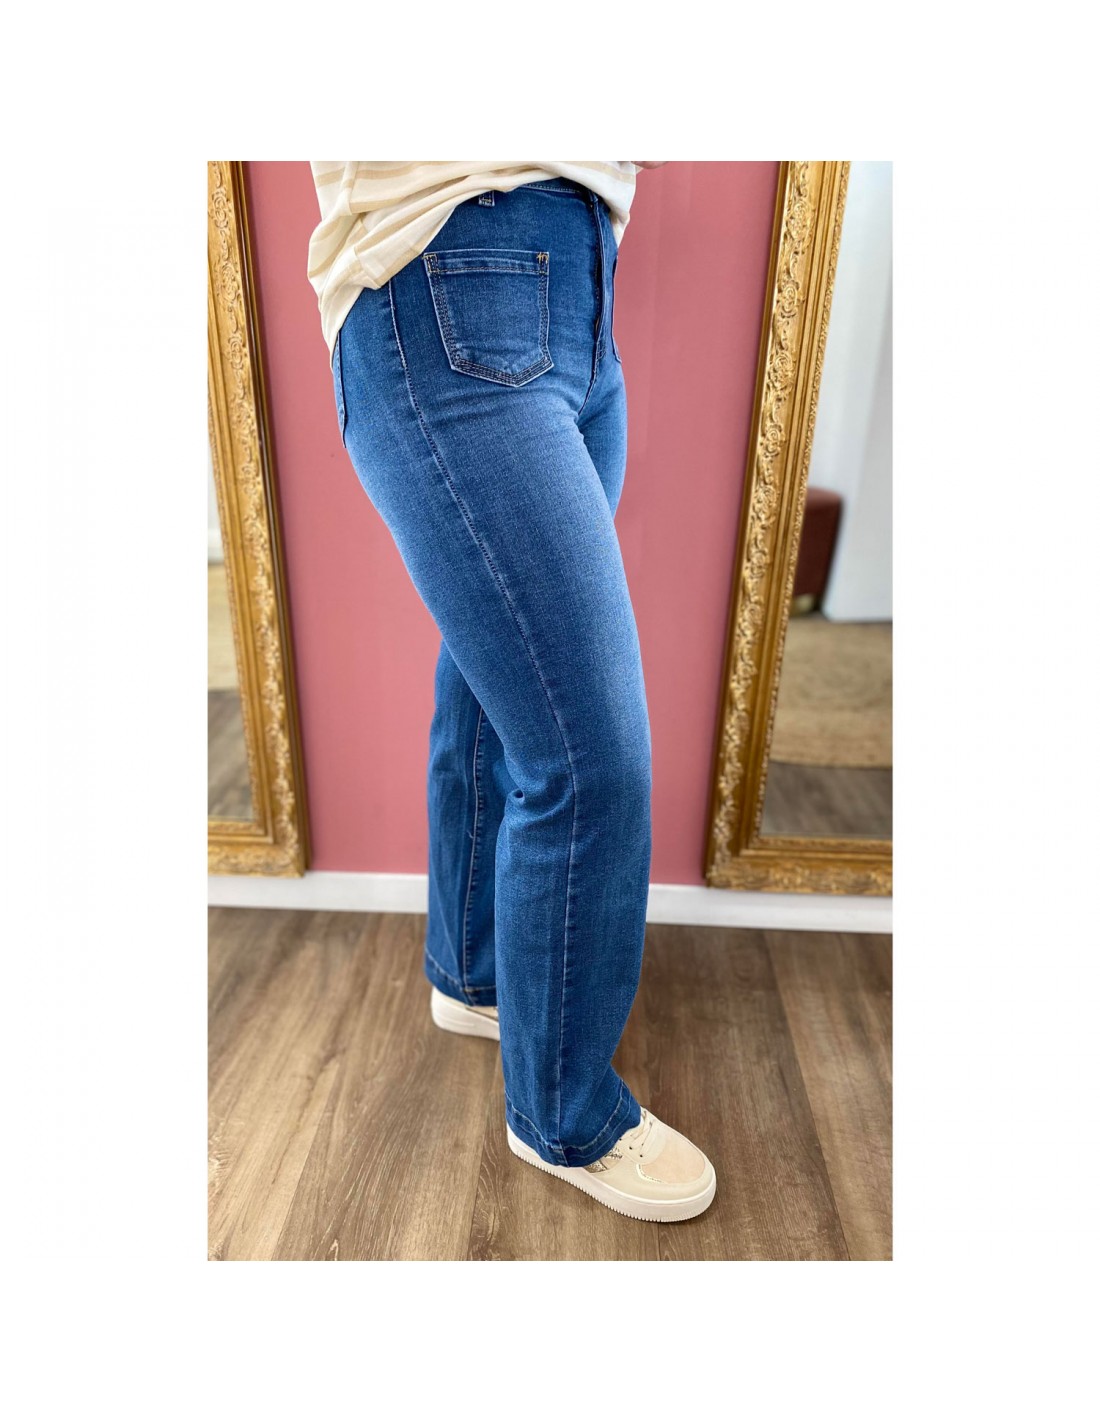 Jean femme bootcut jambes larges taille haute boutons fantaisie perles &  bijoux 34-42